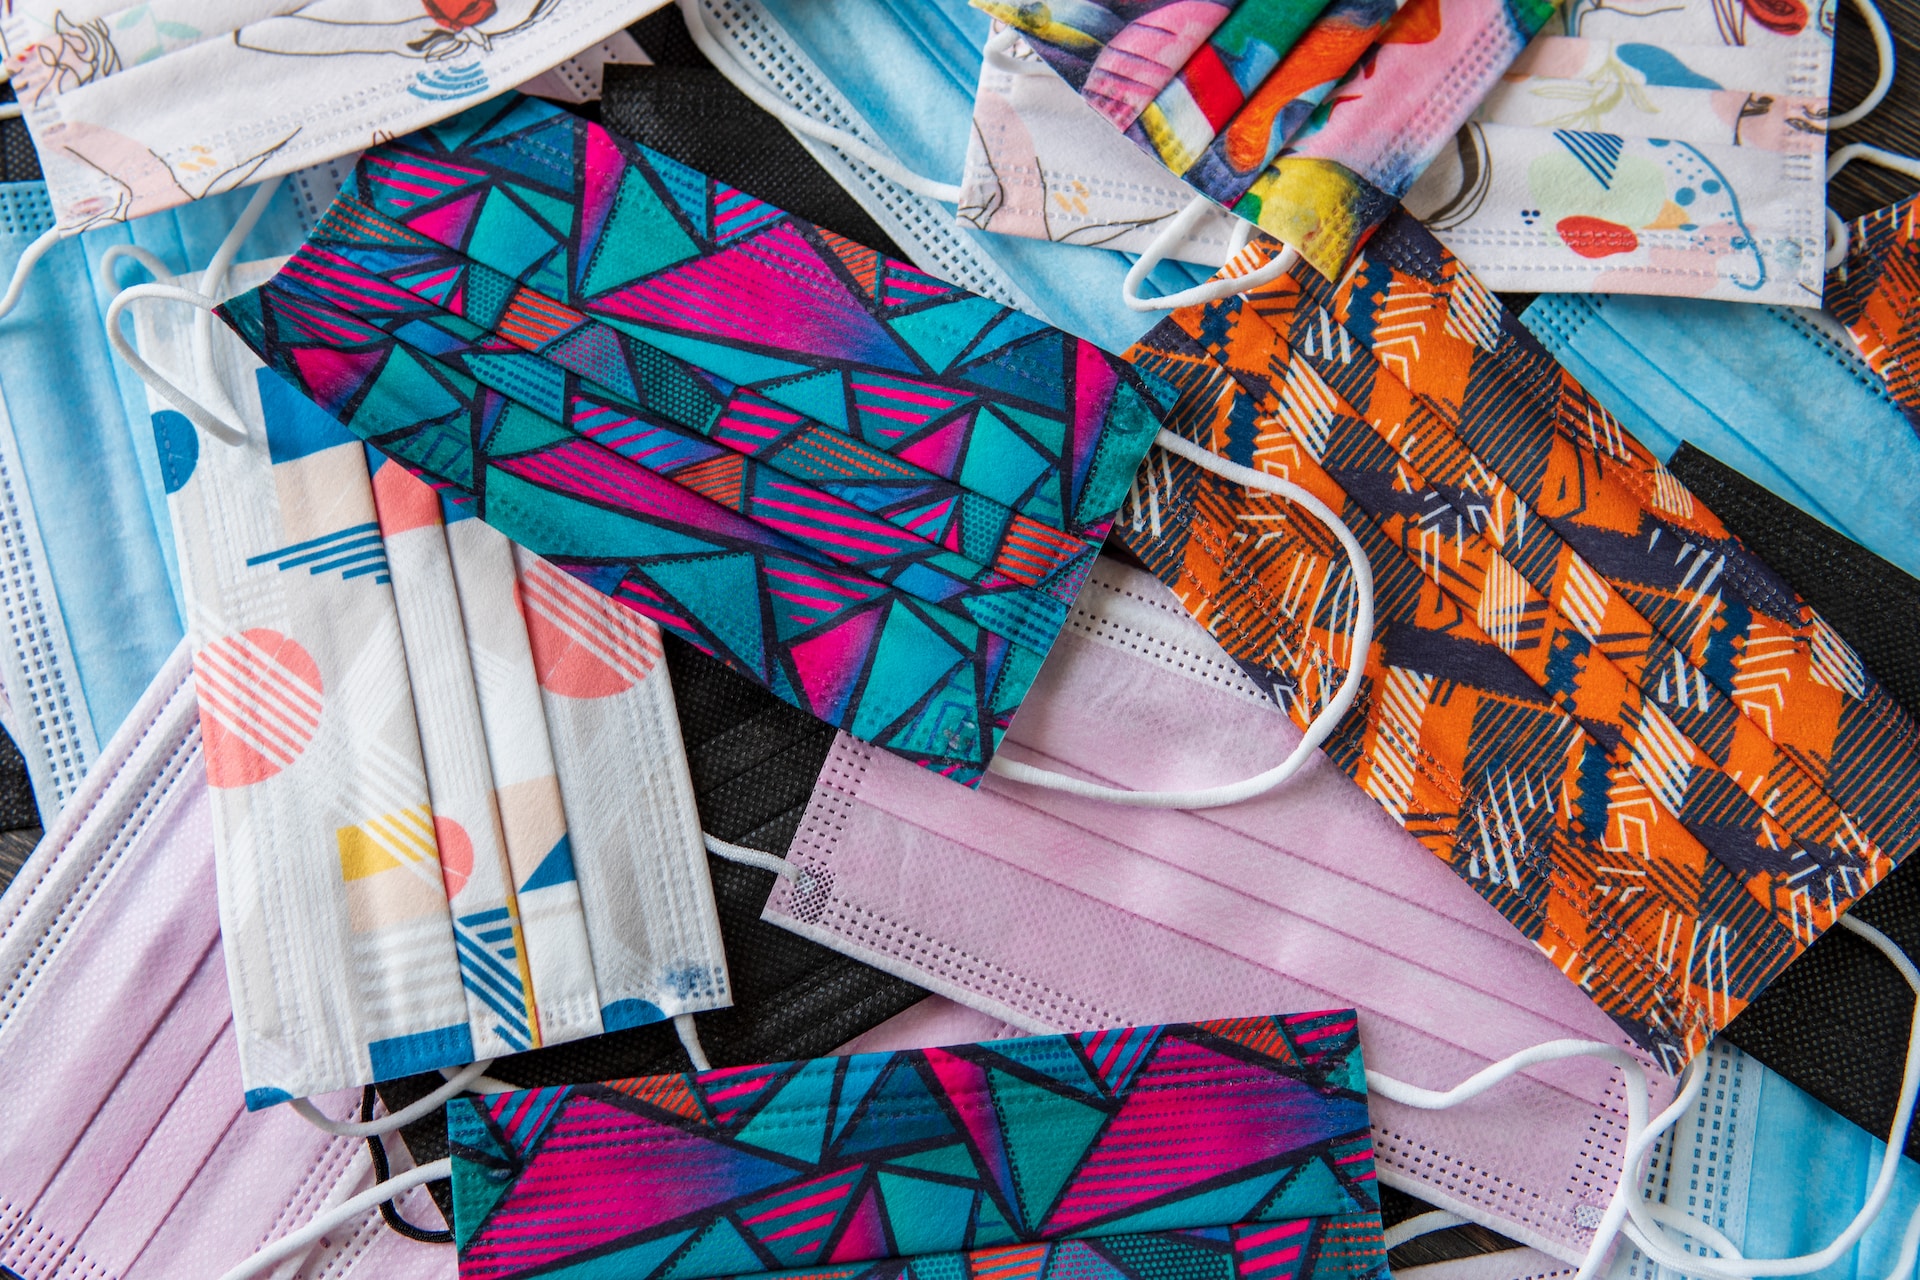 A photograph of a pile of surgical masks with different colorful patterns on them.